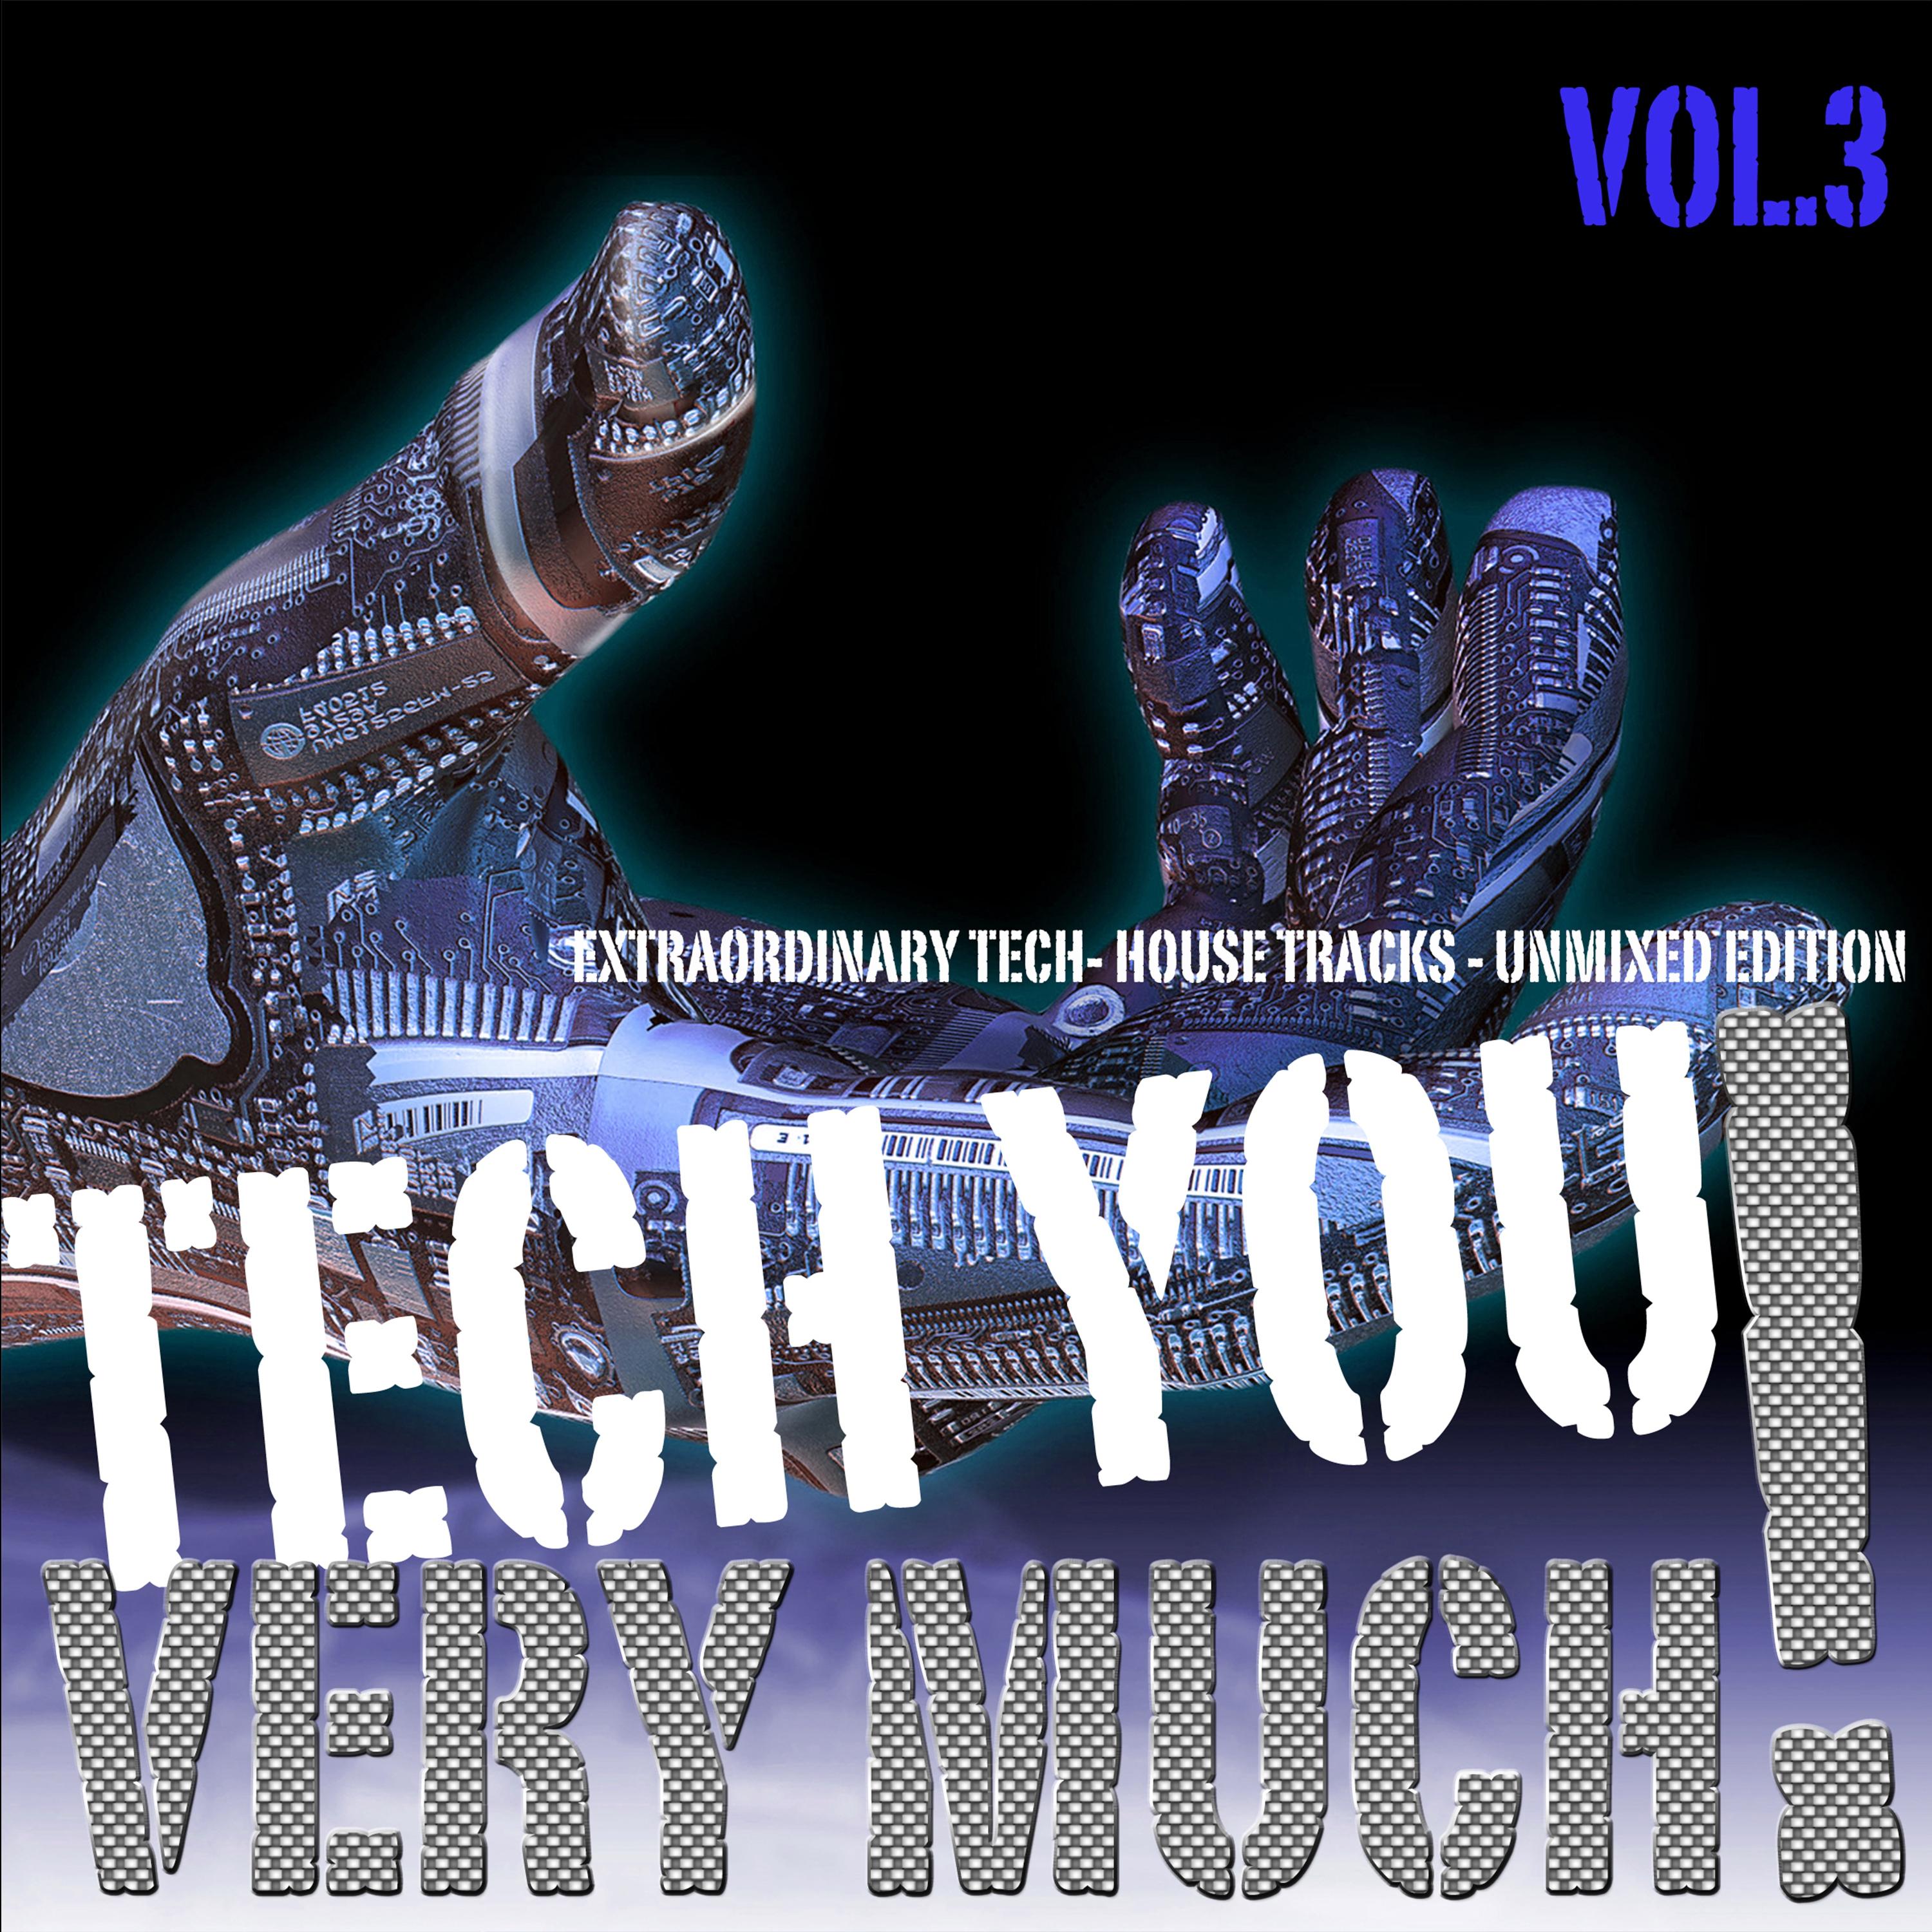 Tech You Very Much!, Vol. 3 (Extraordinary Tech- House Tracks - Unmixed Edition)